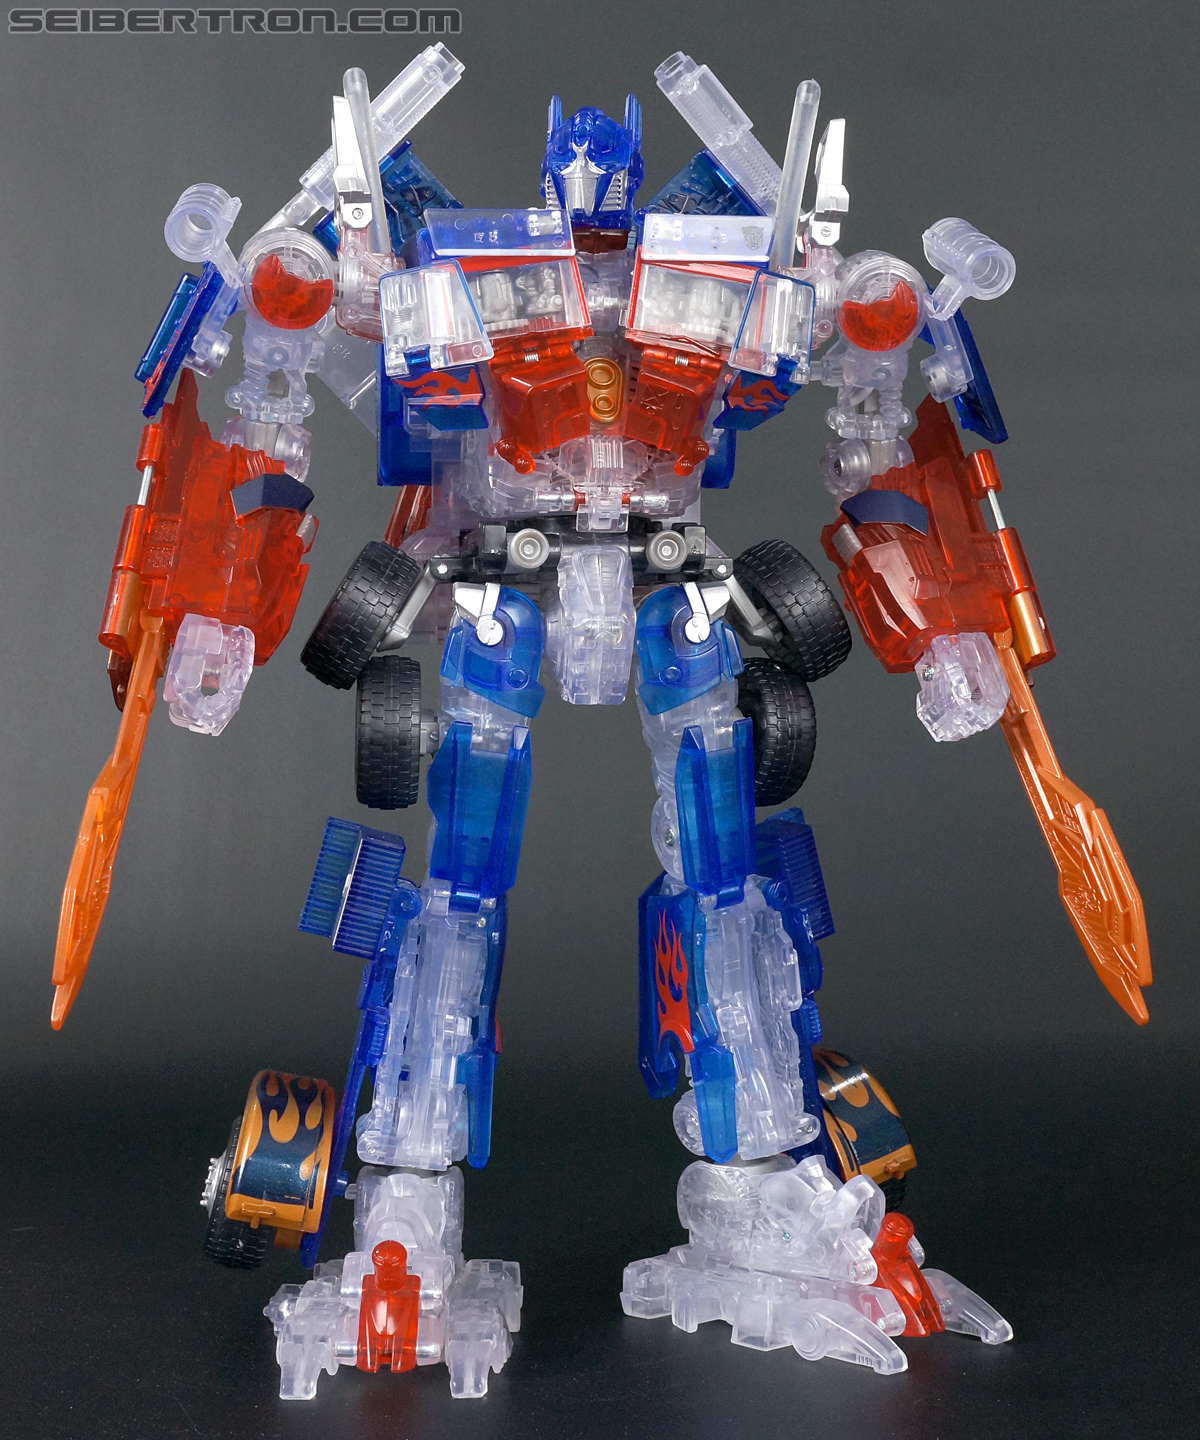 Transformers Revenge of the Fallen Optimus Prime Limited Clear Color Edition (Image #119 of 125)